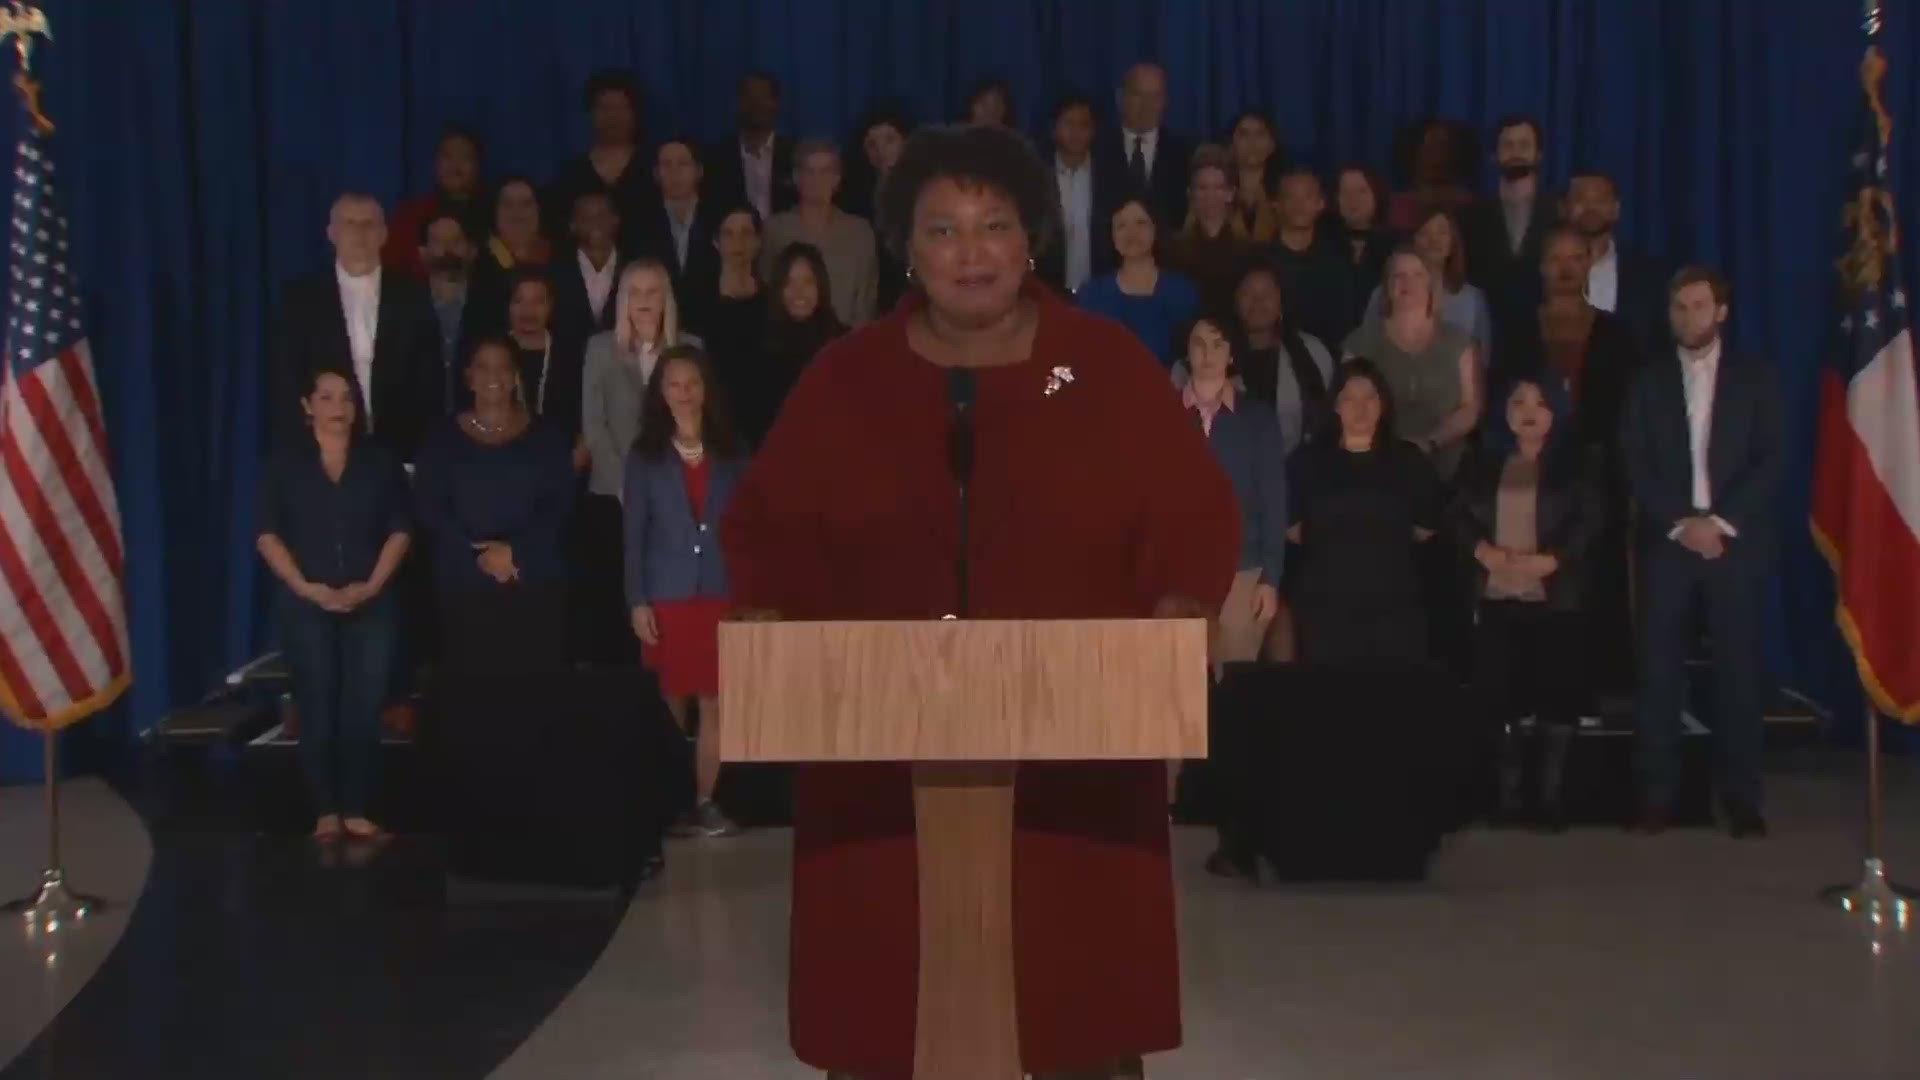 Former Georgia governor candidate Stacey Abraham delivered the response to President Trump's 2019 State of the Union address.